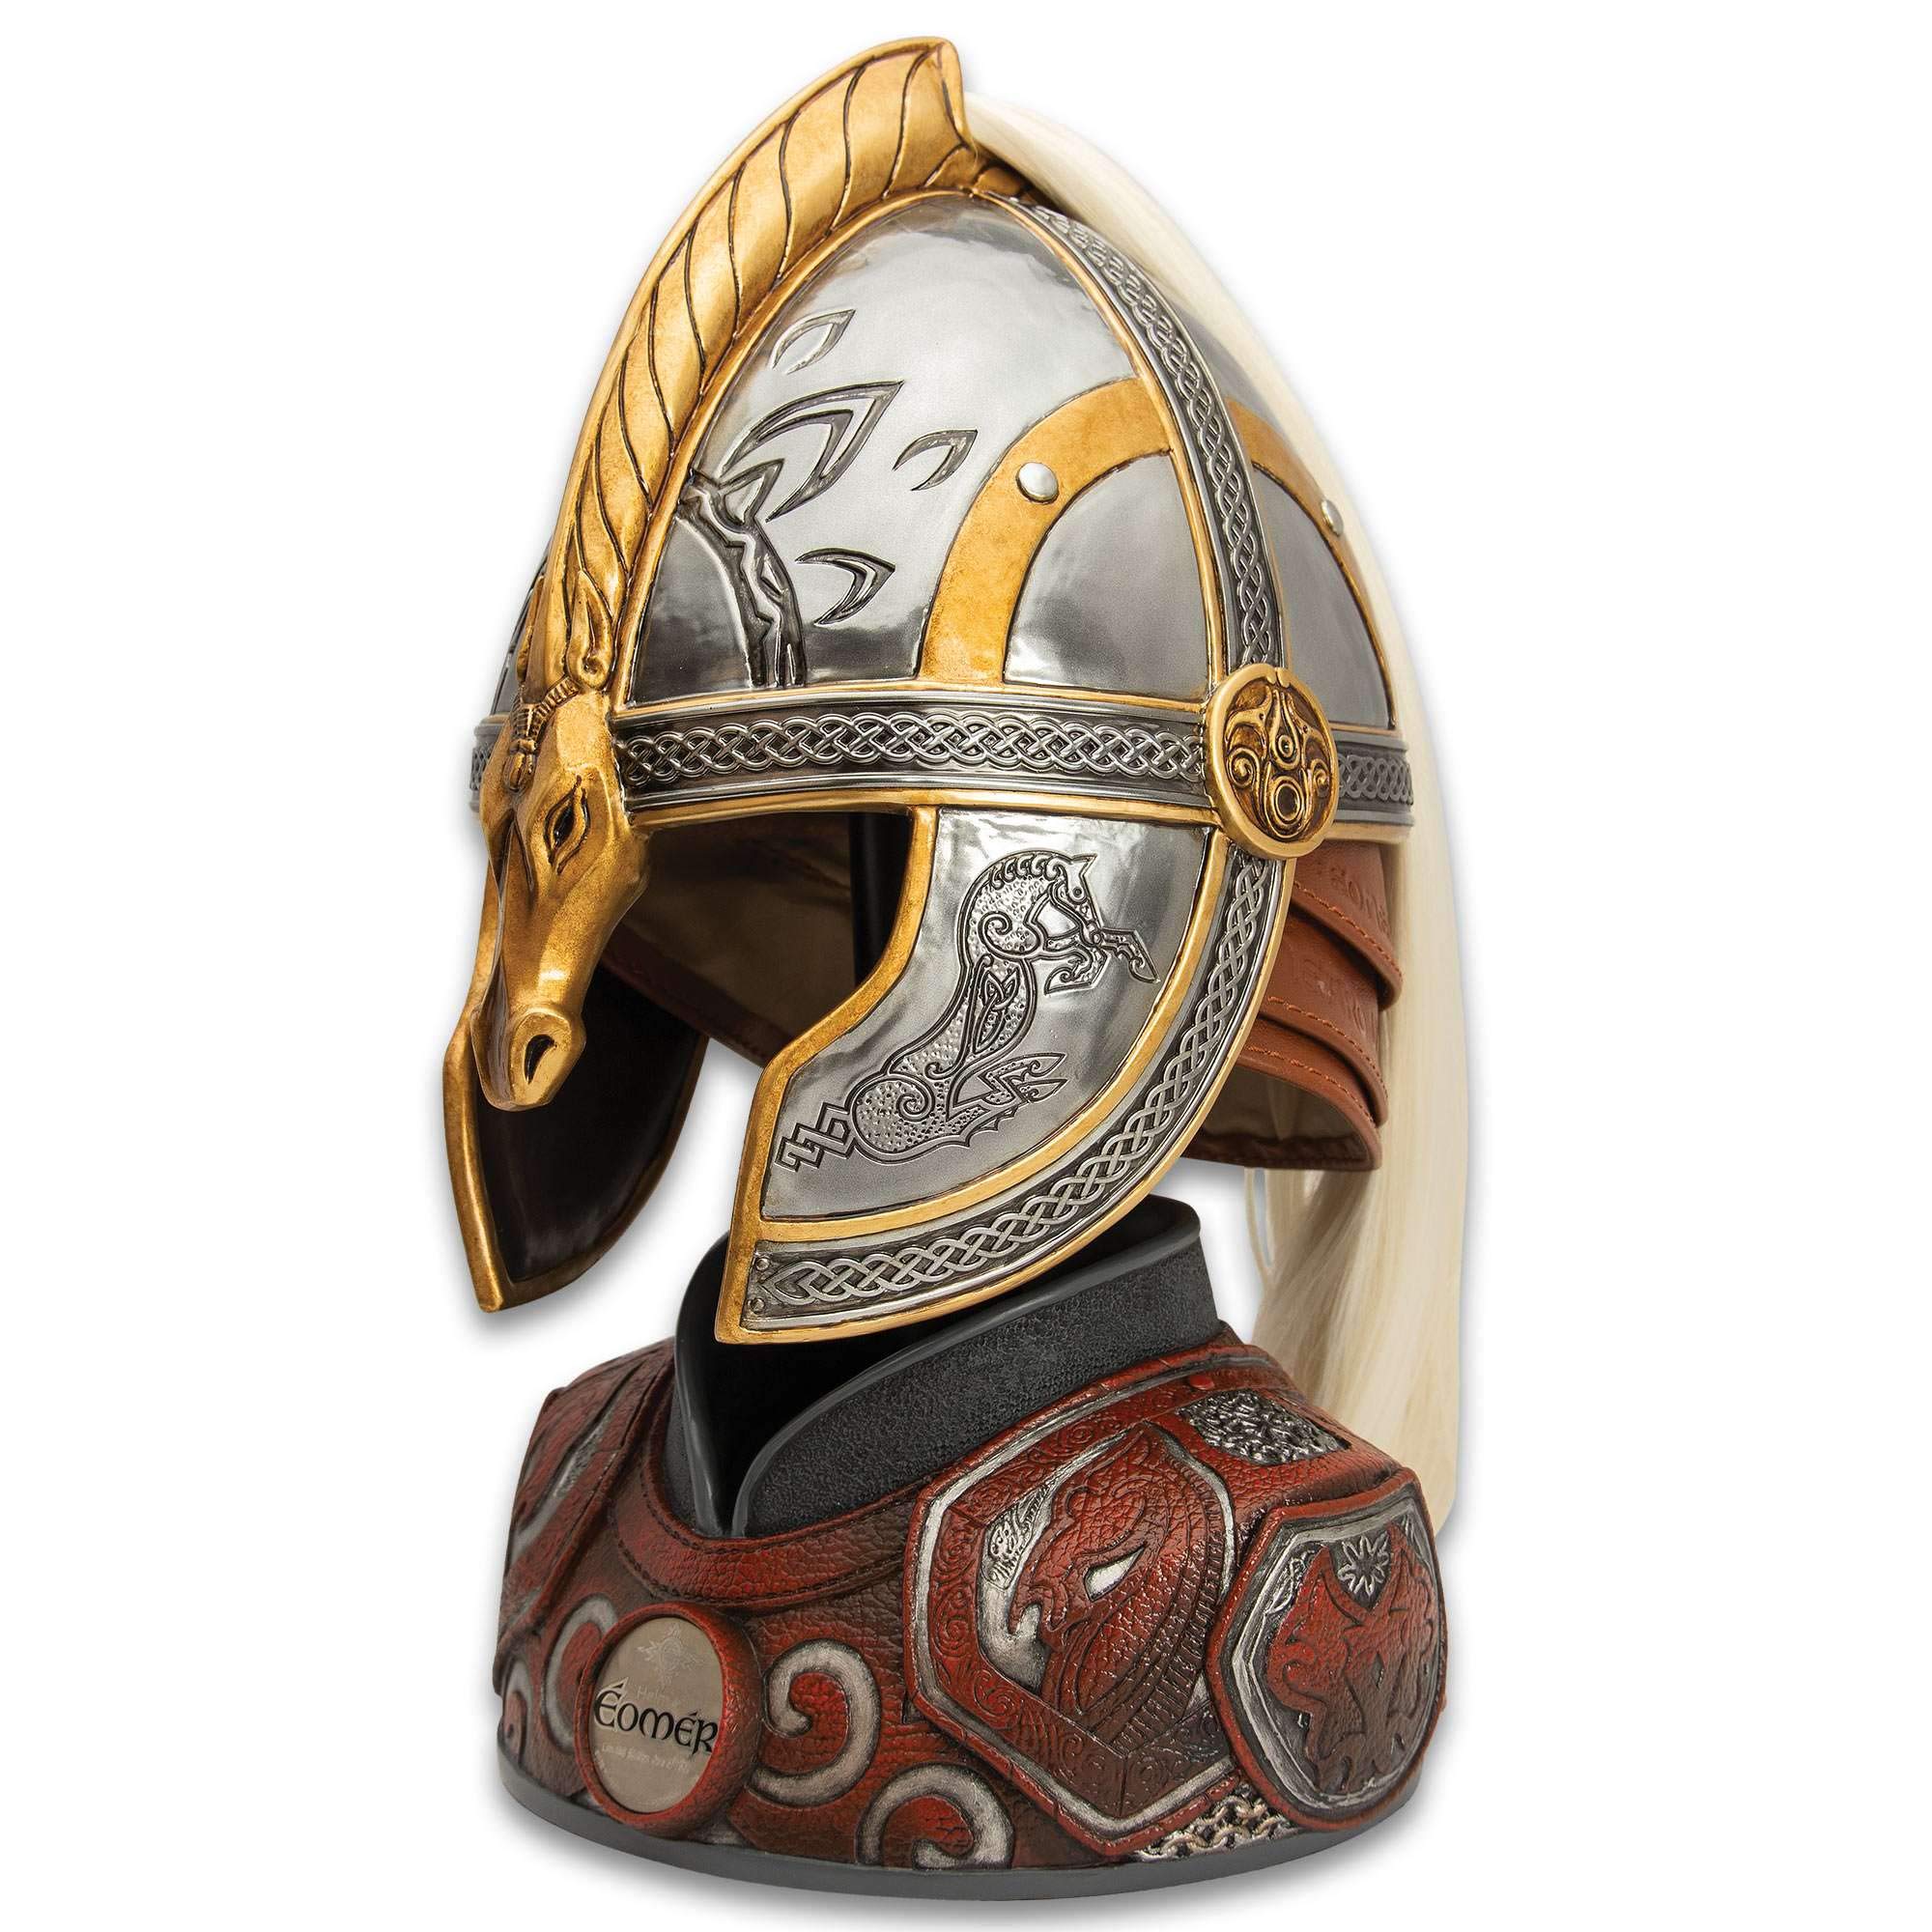 UNITED CUTLERY of Rings Helmet Eomer with Display Stand - Accurate Movie Replica Metal Construct